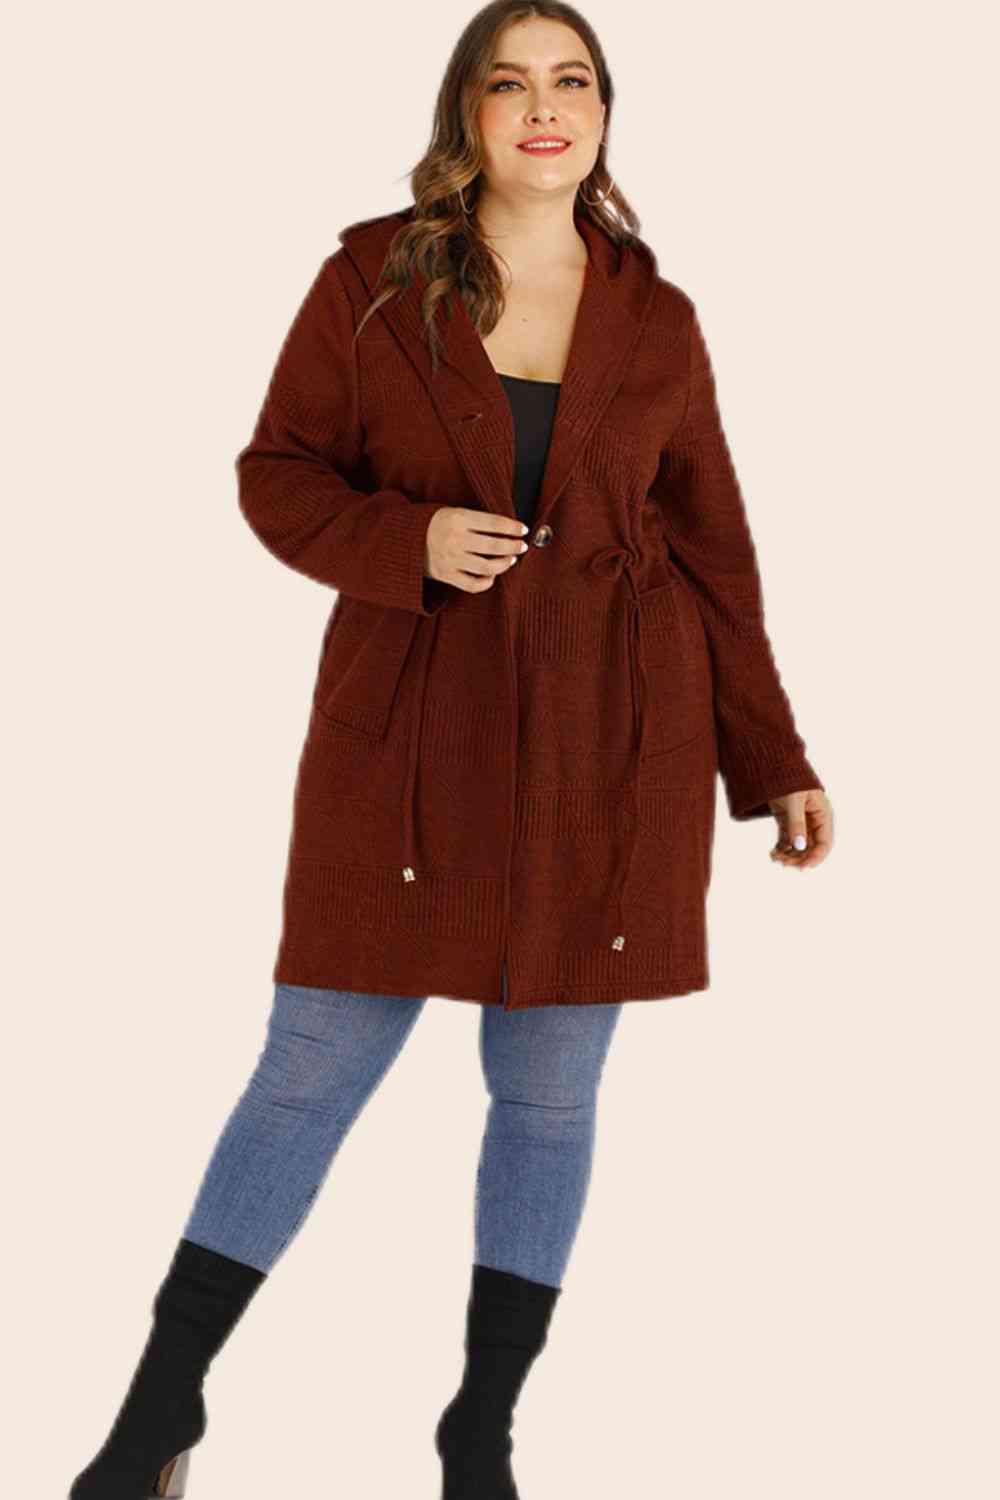 Plus Size Drawstring Waist Hooded Cardigan with Pockets - Bellisima Clothing Collective